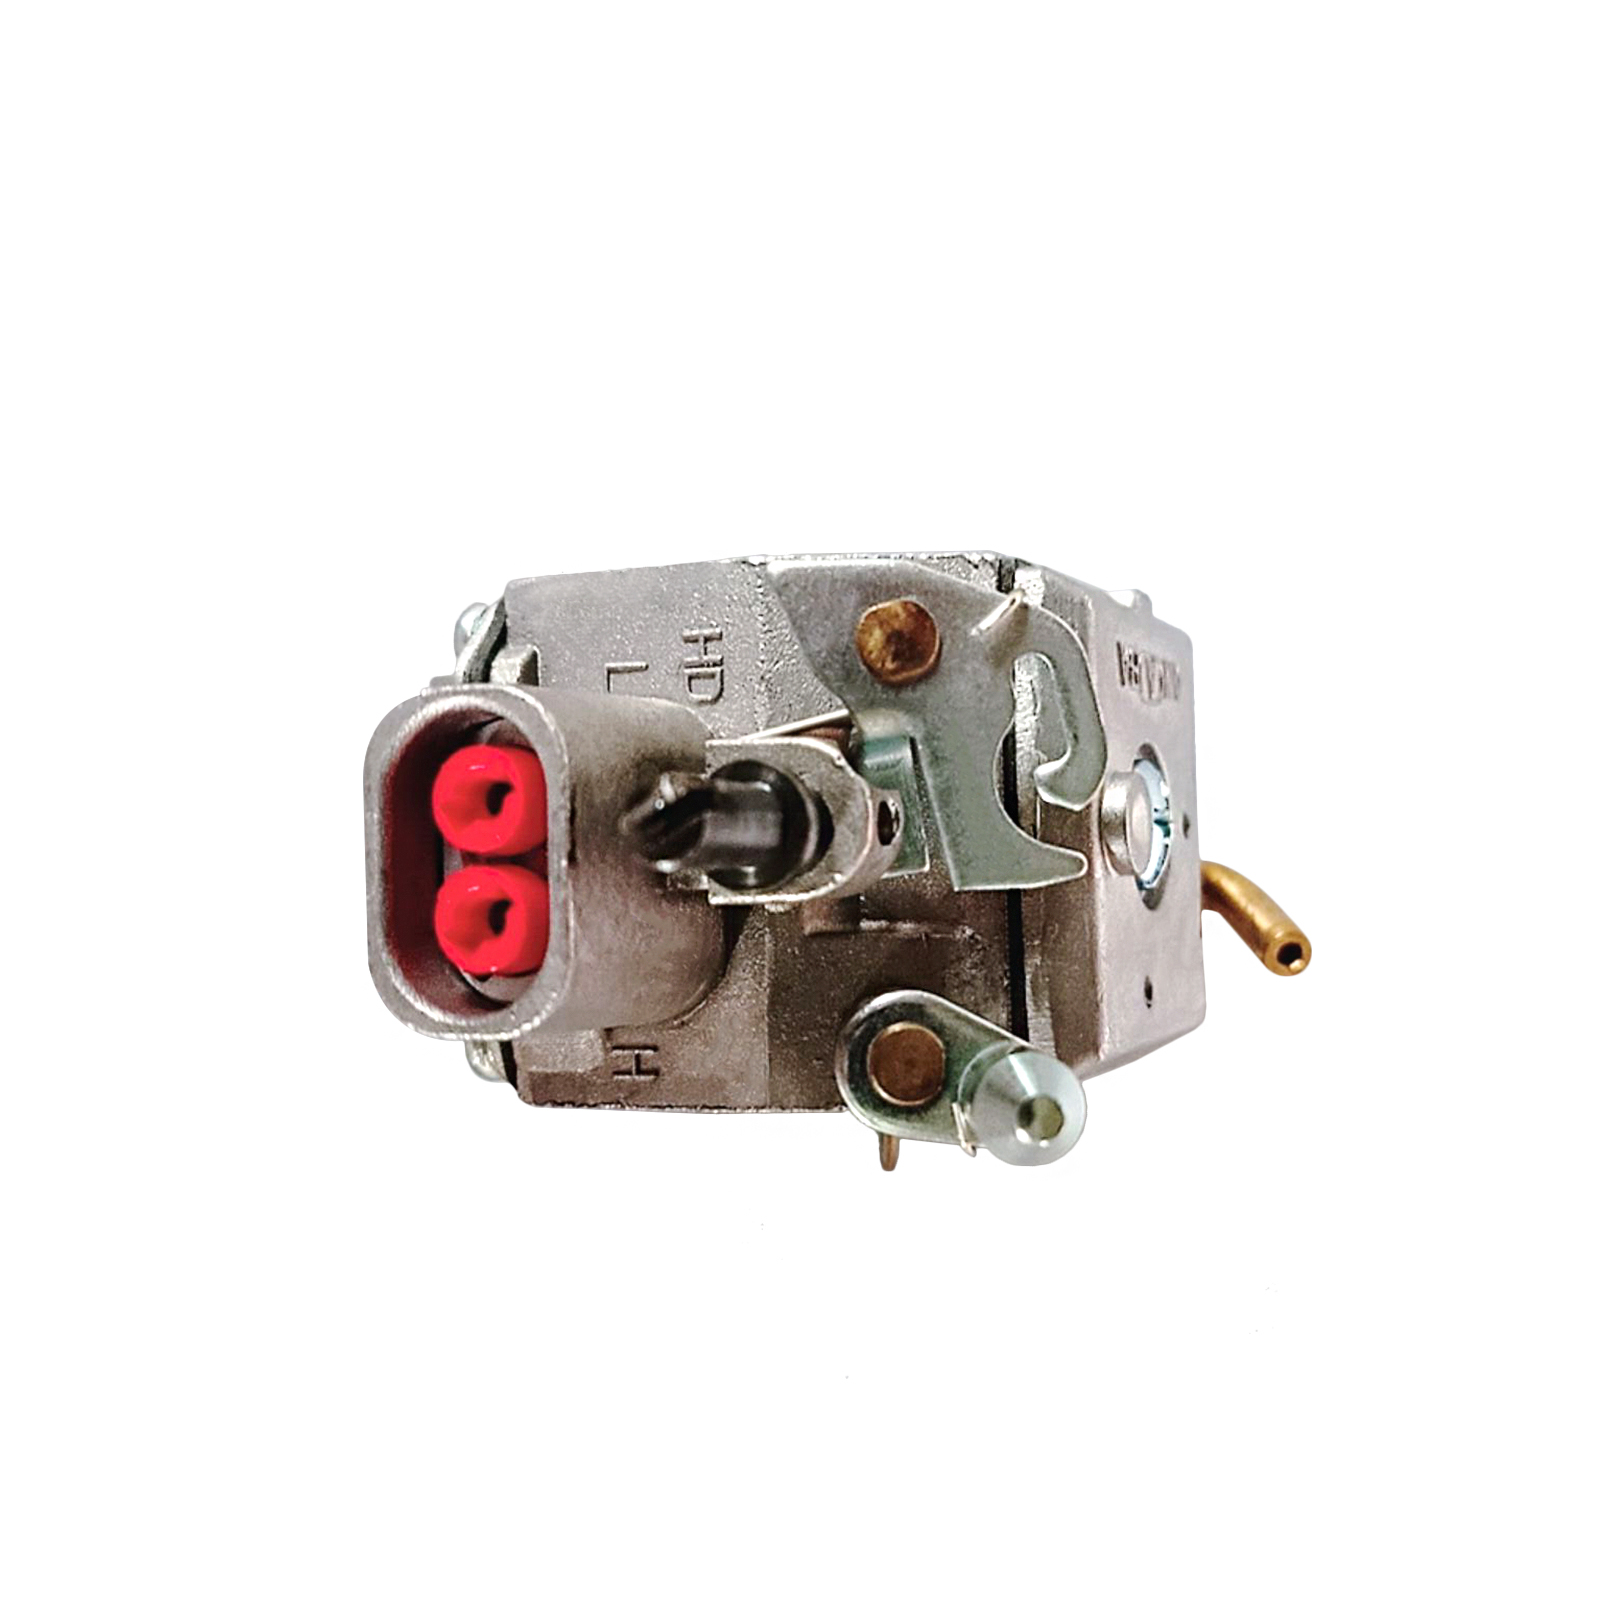 Carburetor For Stihl MS270 MS270C MS280 MS280C Chainsaw Replaces OEM HD-33, 1133 120 0607